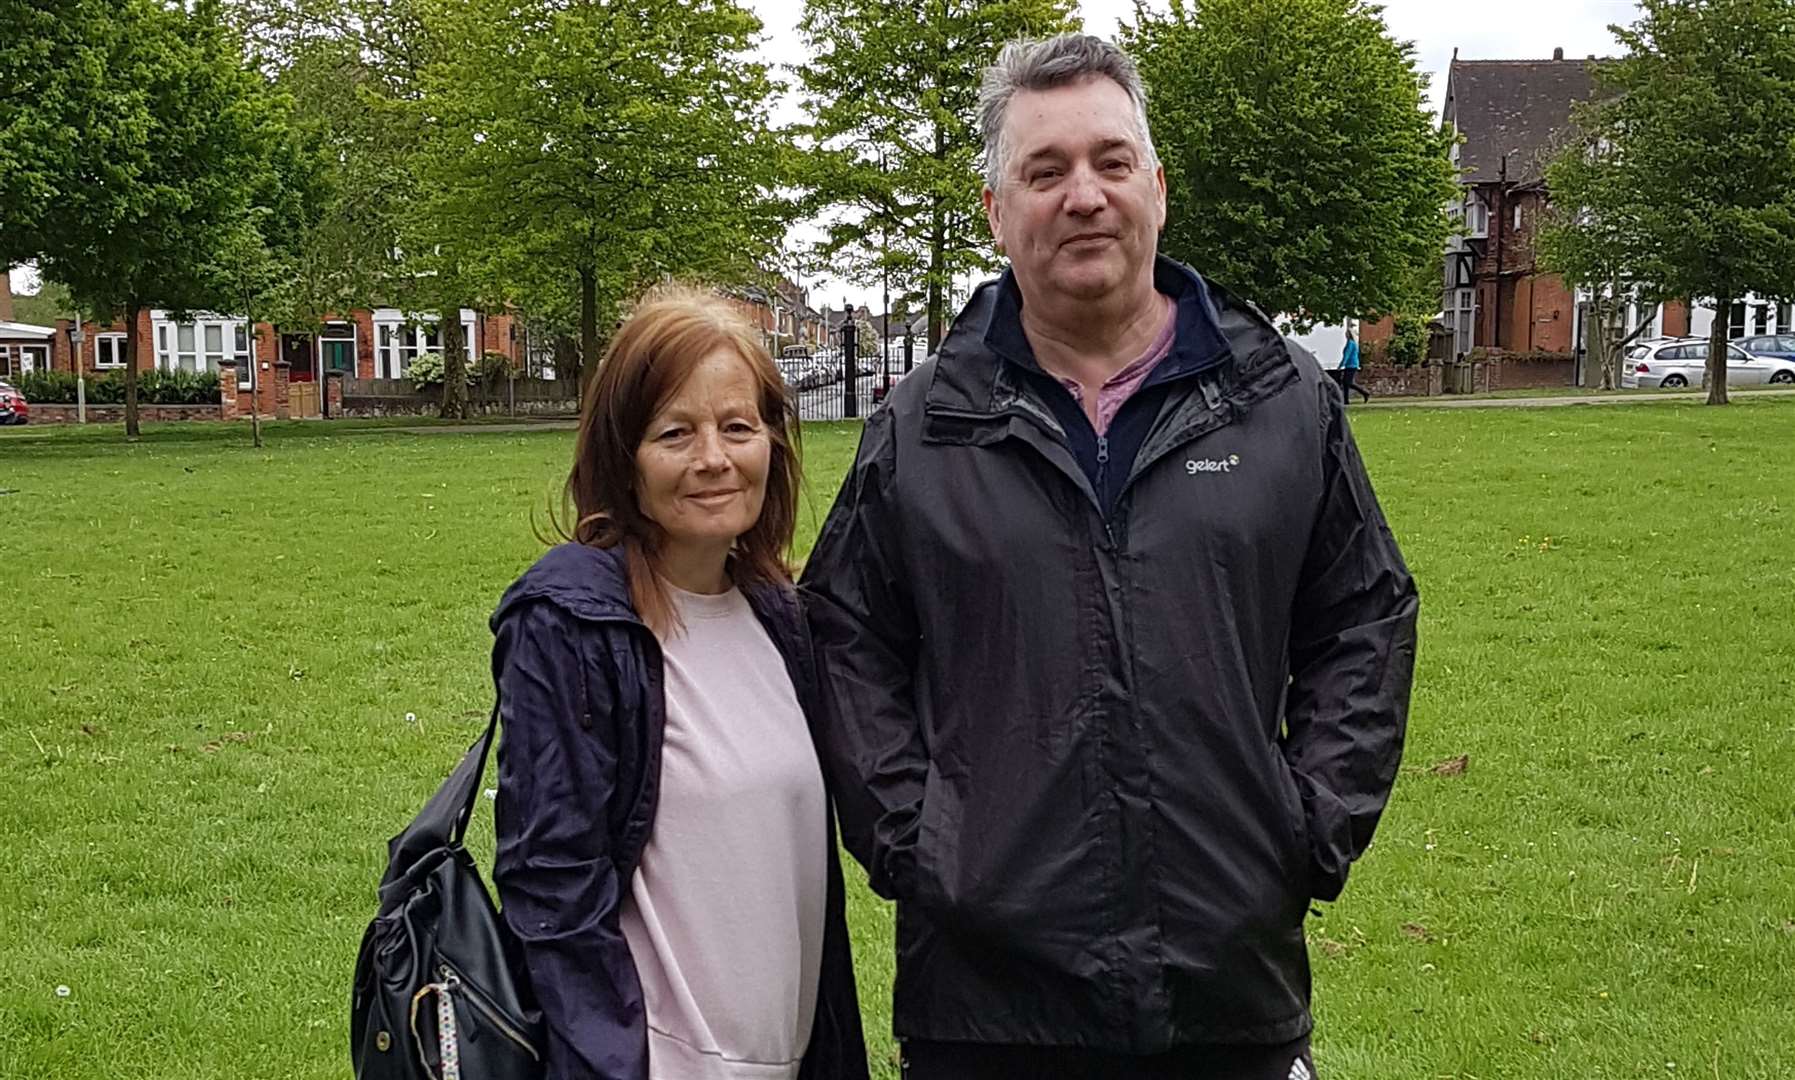 Tina and Nick Terry in Victoria Park, Ashford